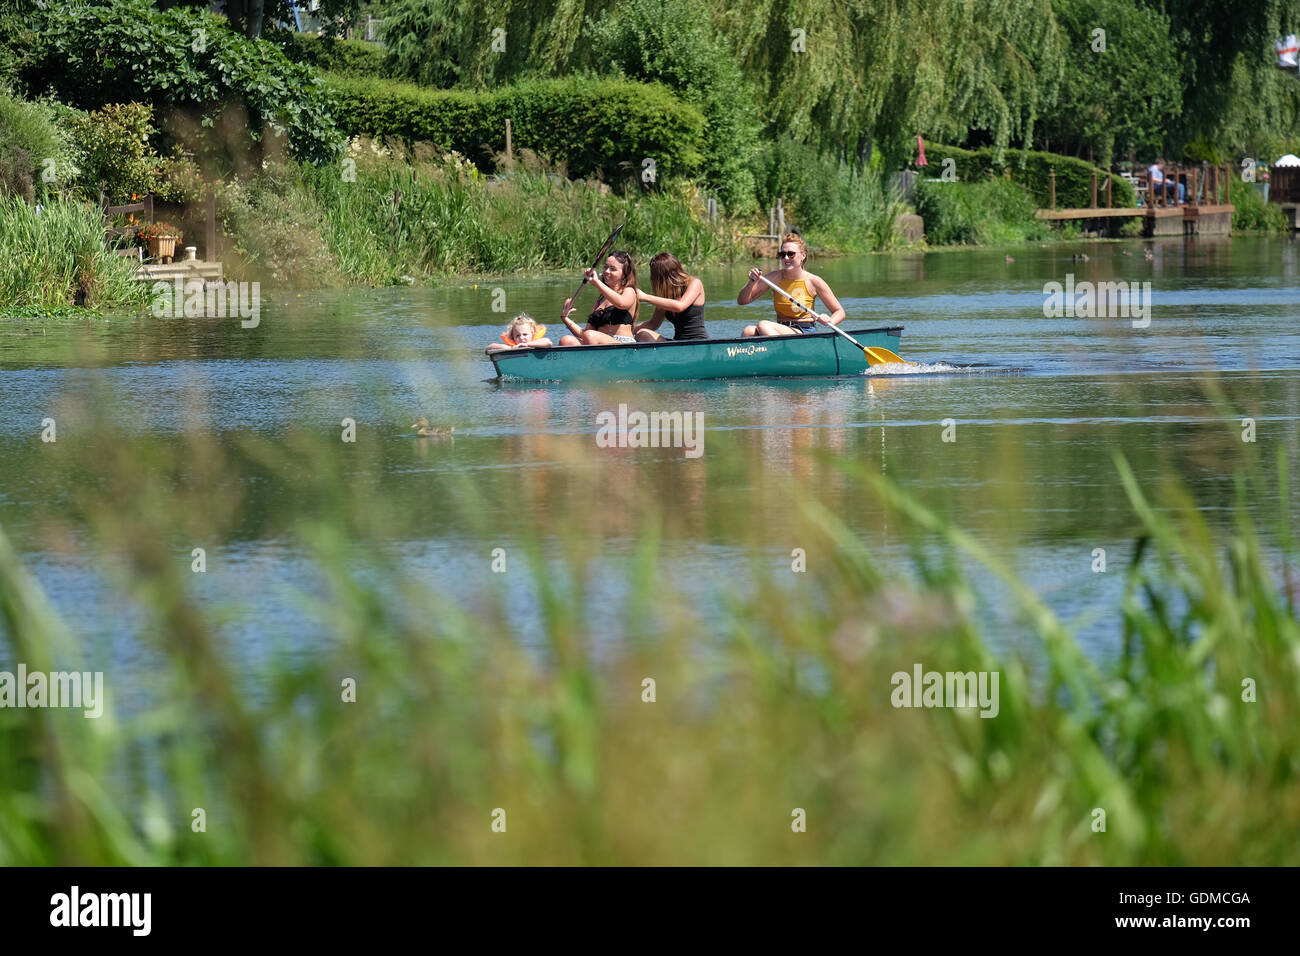 People enjoying the hot weather on the river soar has the heatwave continues Stock Photo